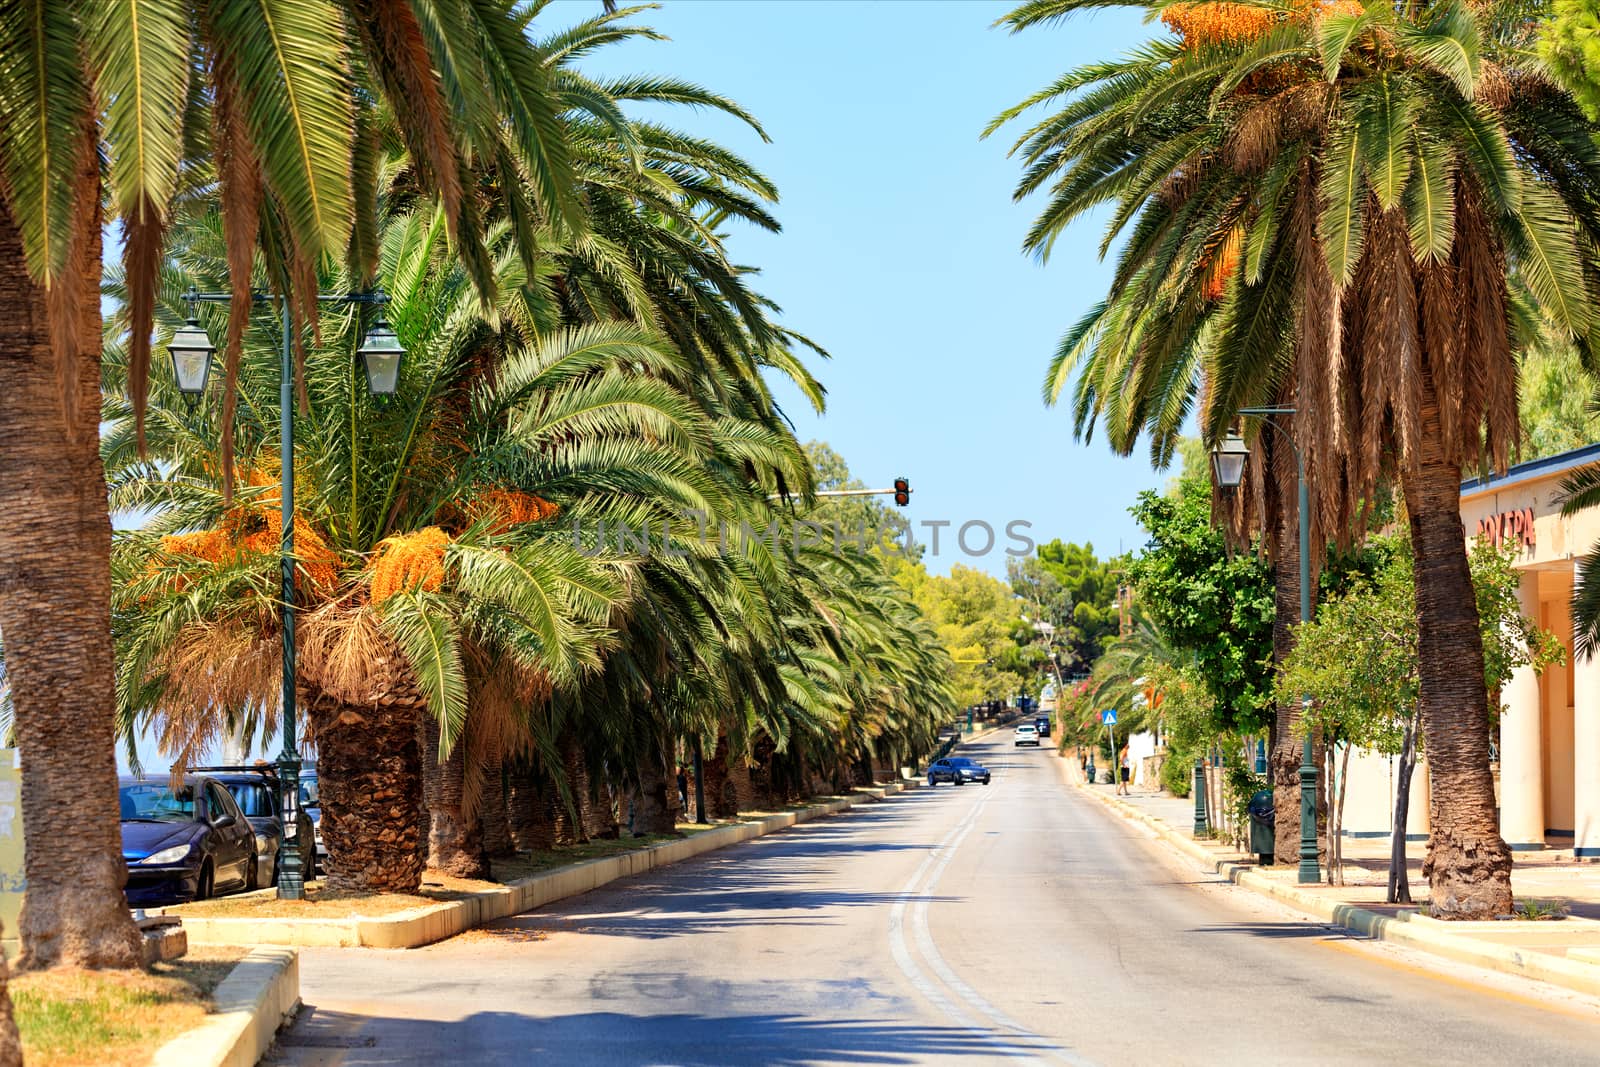 Date palm trees with fiery red fruits grow along the carriageway and give a dense shadow on a clear sunny day in the city of Loutraki, Greece, image with copy space.